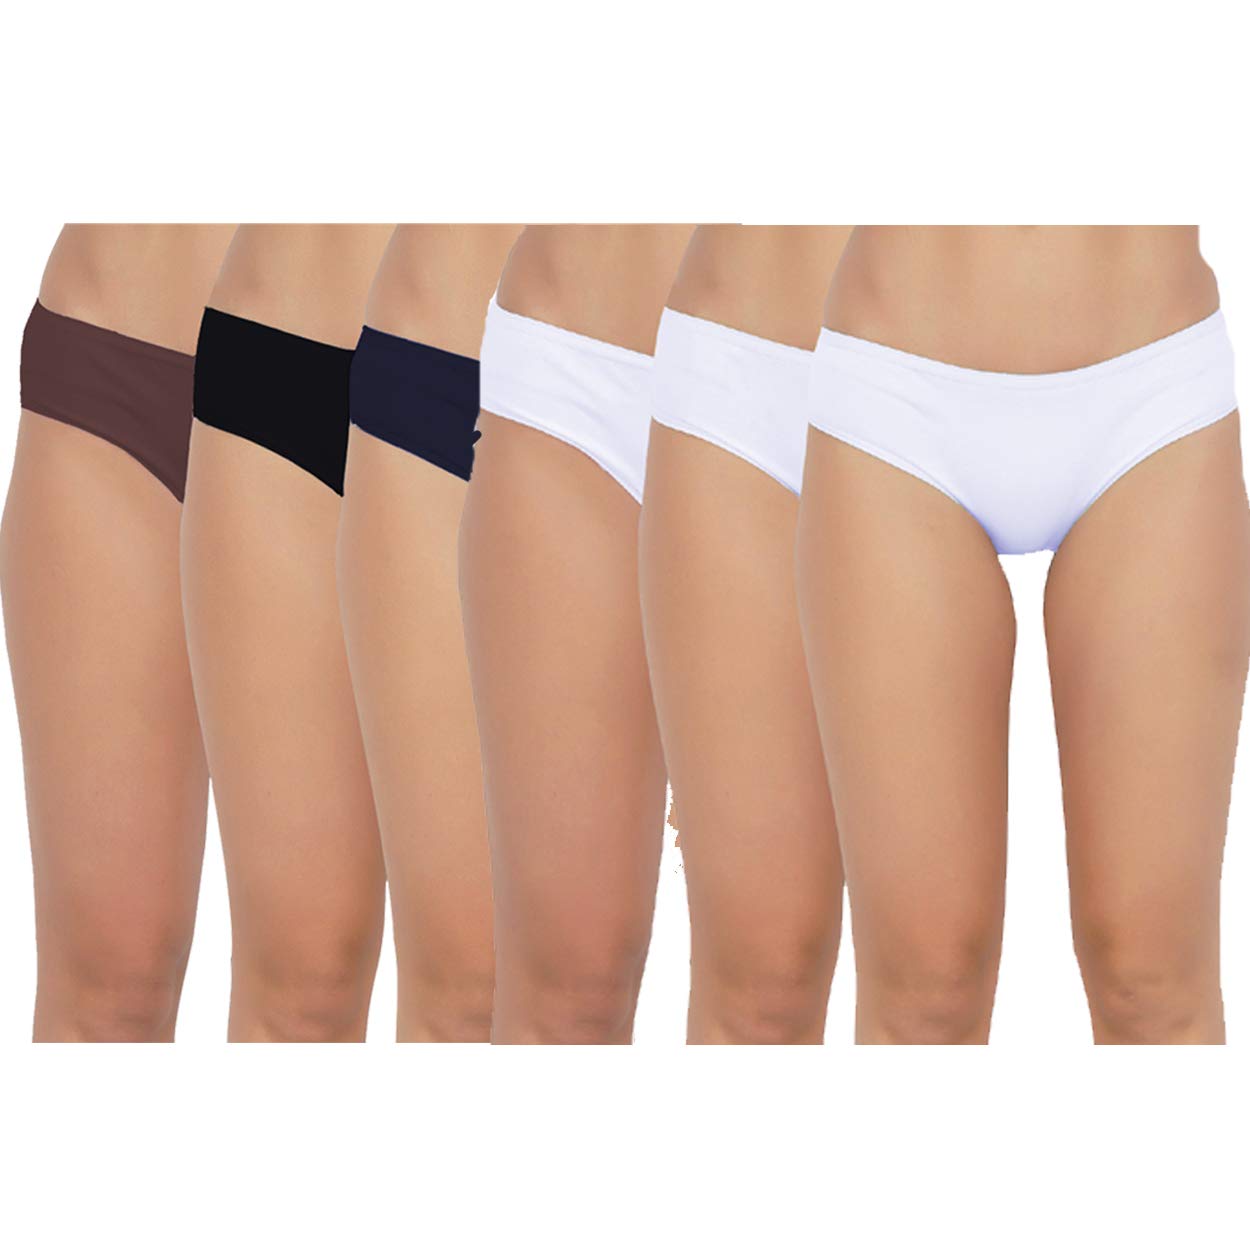 Ladies Panties 100% Pure Cotton Plain Briefs Under Innerwear for Women -  Combo Pack of 5